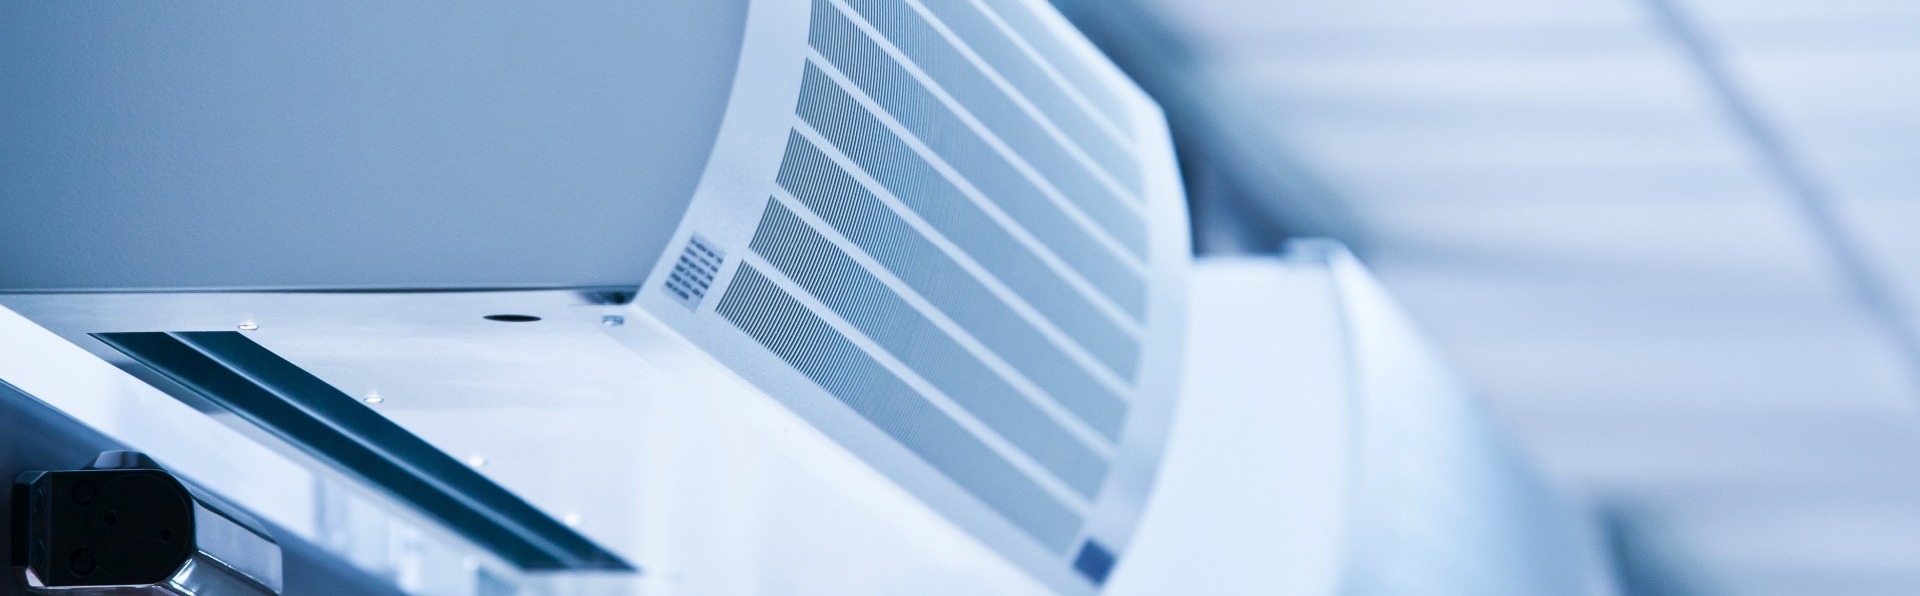 Commercial & Home Air conditioning installers and maintenance contractors based in Hinckley, Leicestershire, with nationwide services